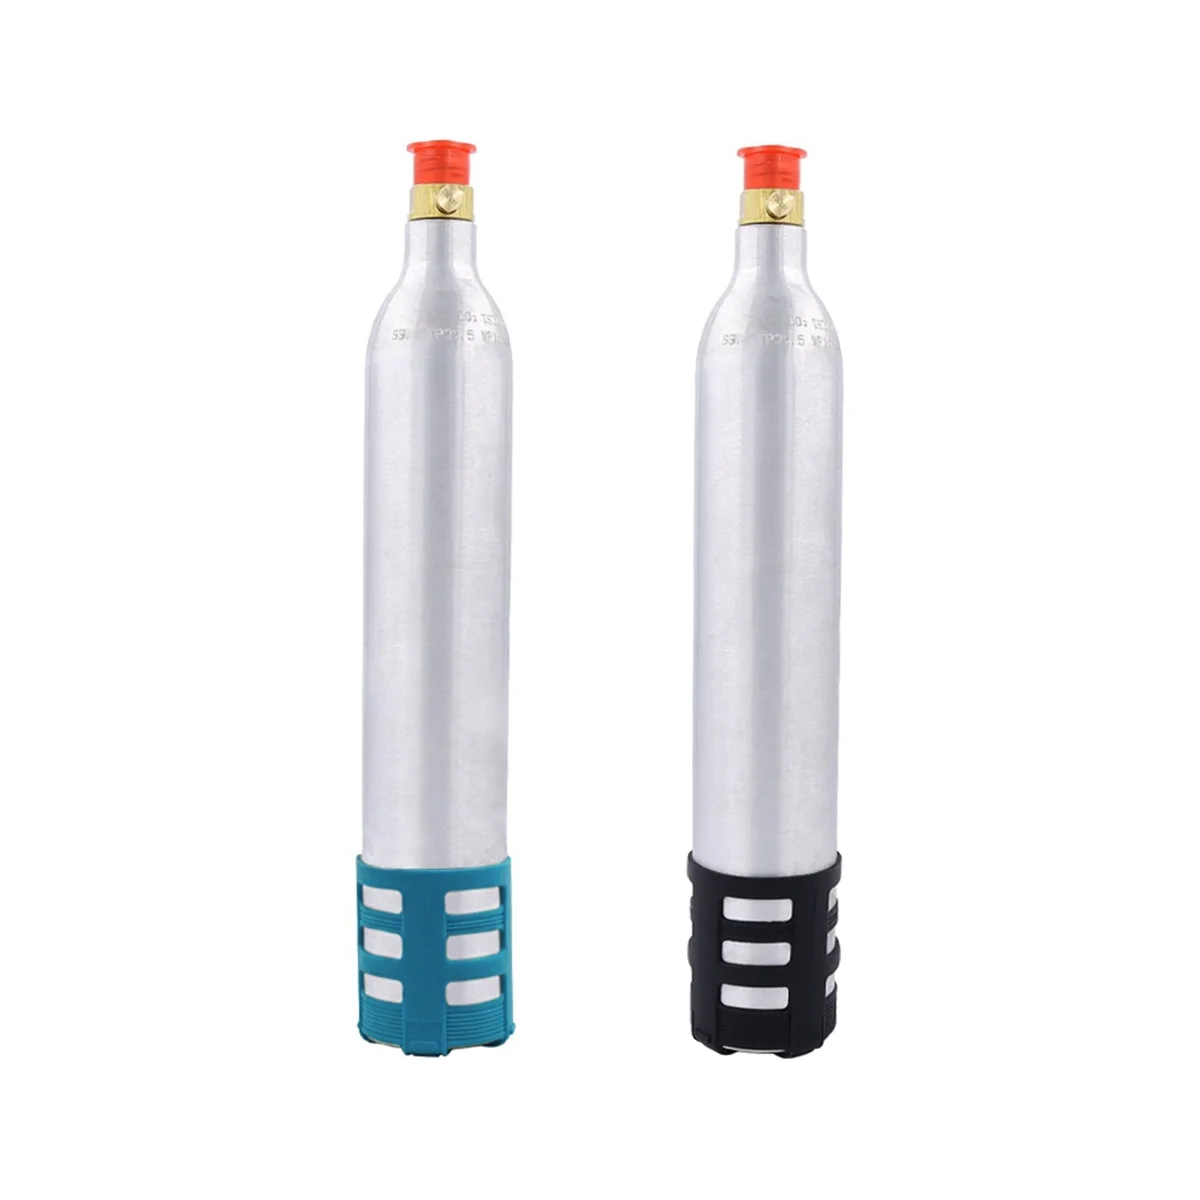 

2PCS 0.6L Soda Maker Refillable Soda Spare Reusable CO2 Cylinder Accessory for Soda Machines,Black+Blue+Silver